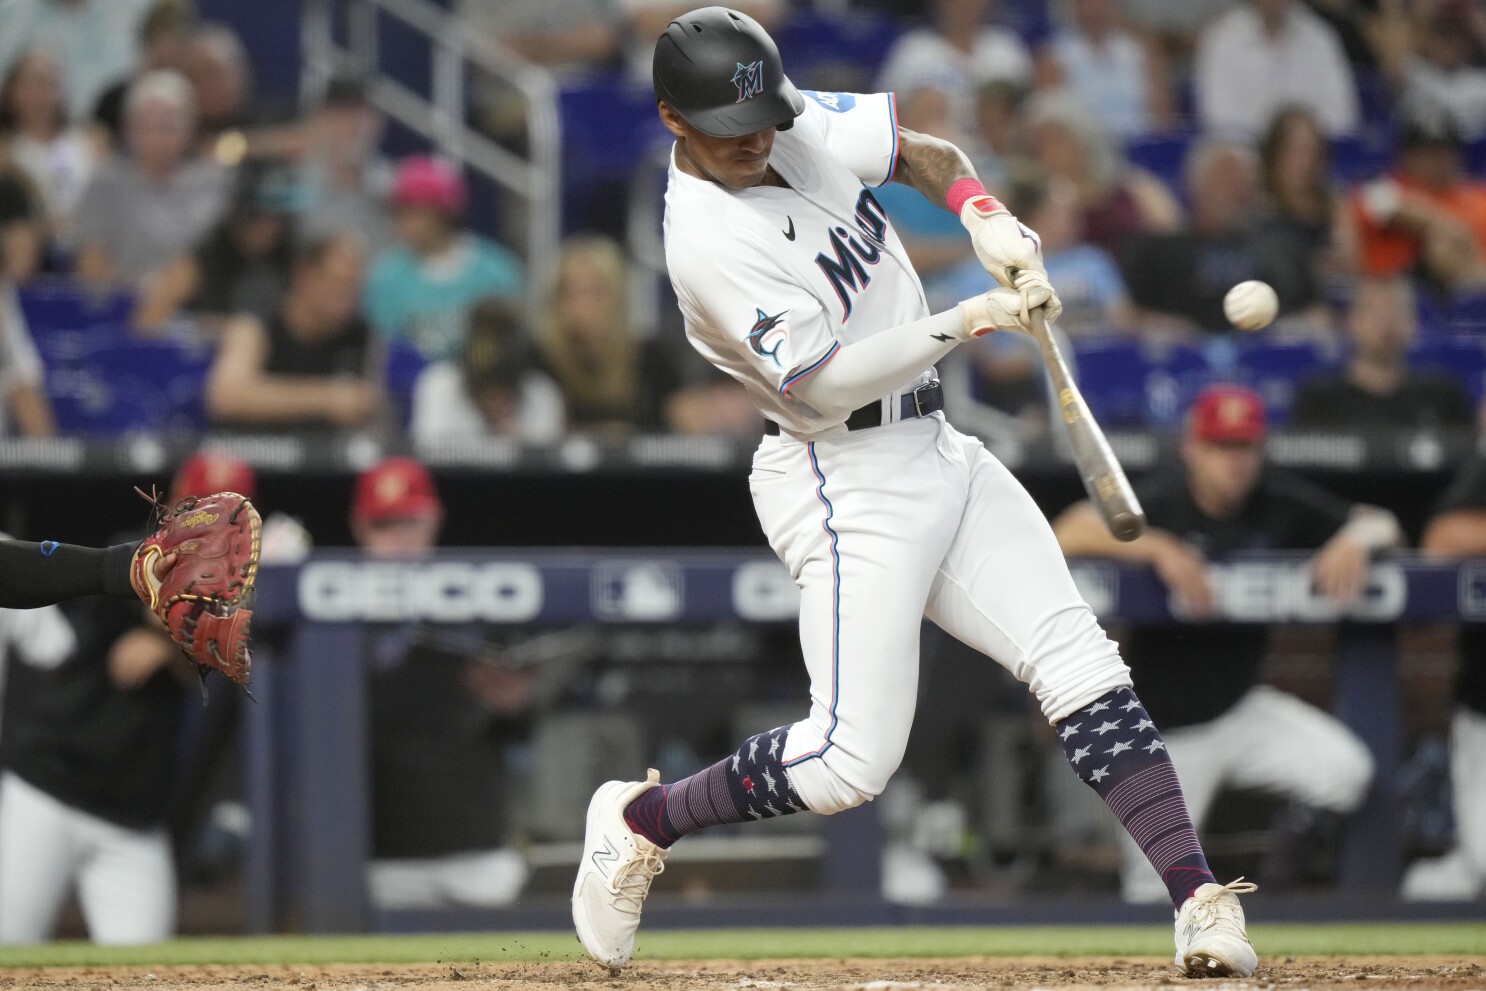 Luis Marté called up from Triple-A by the Marlins